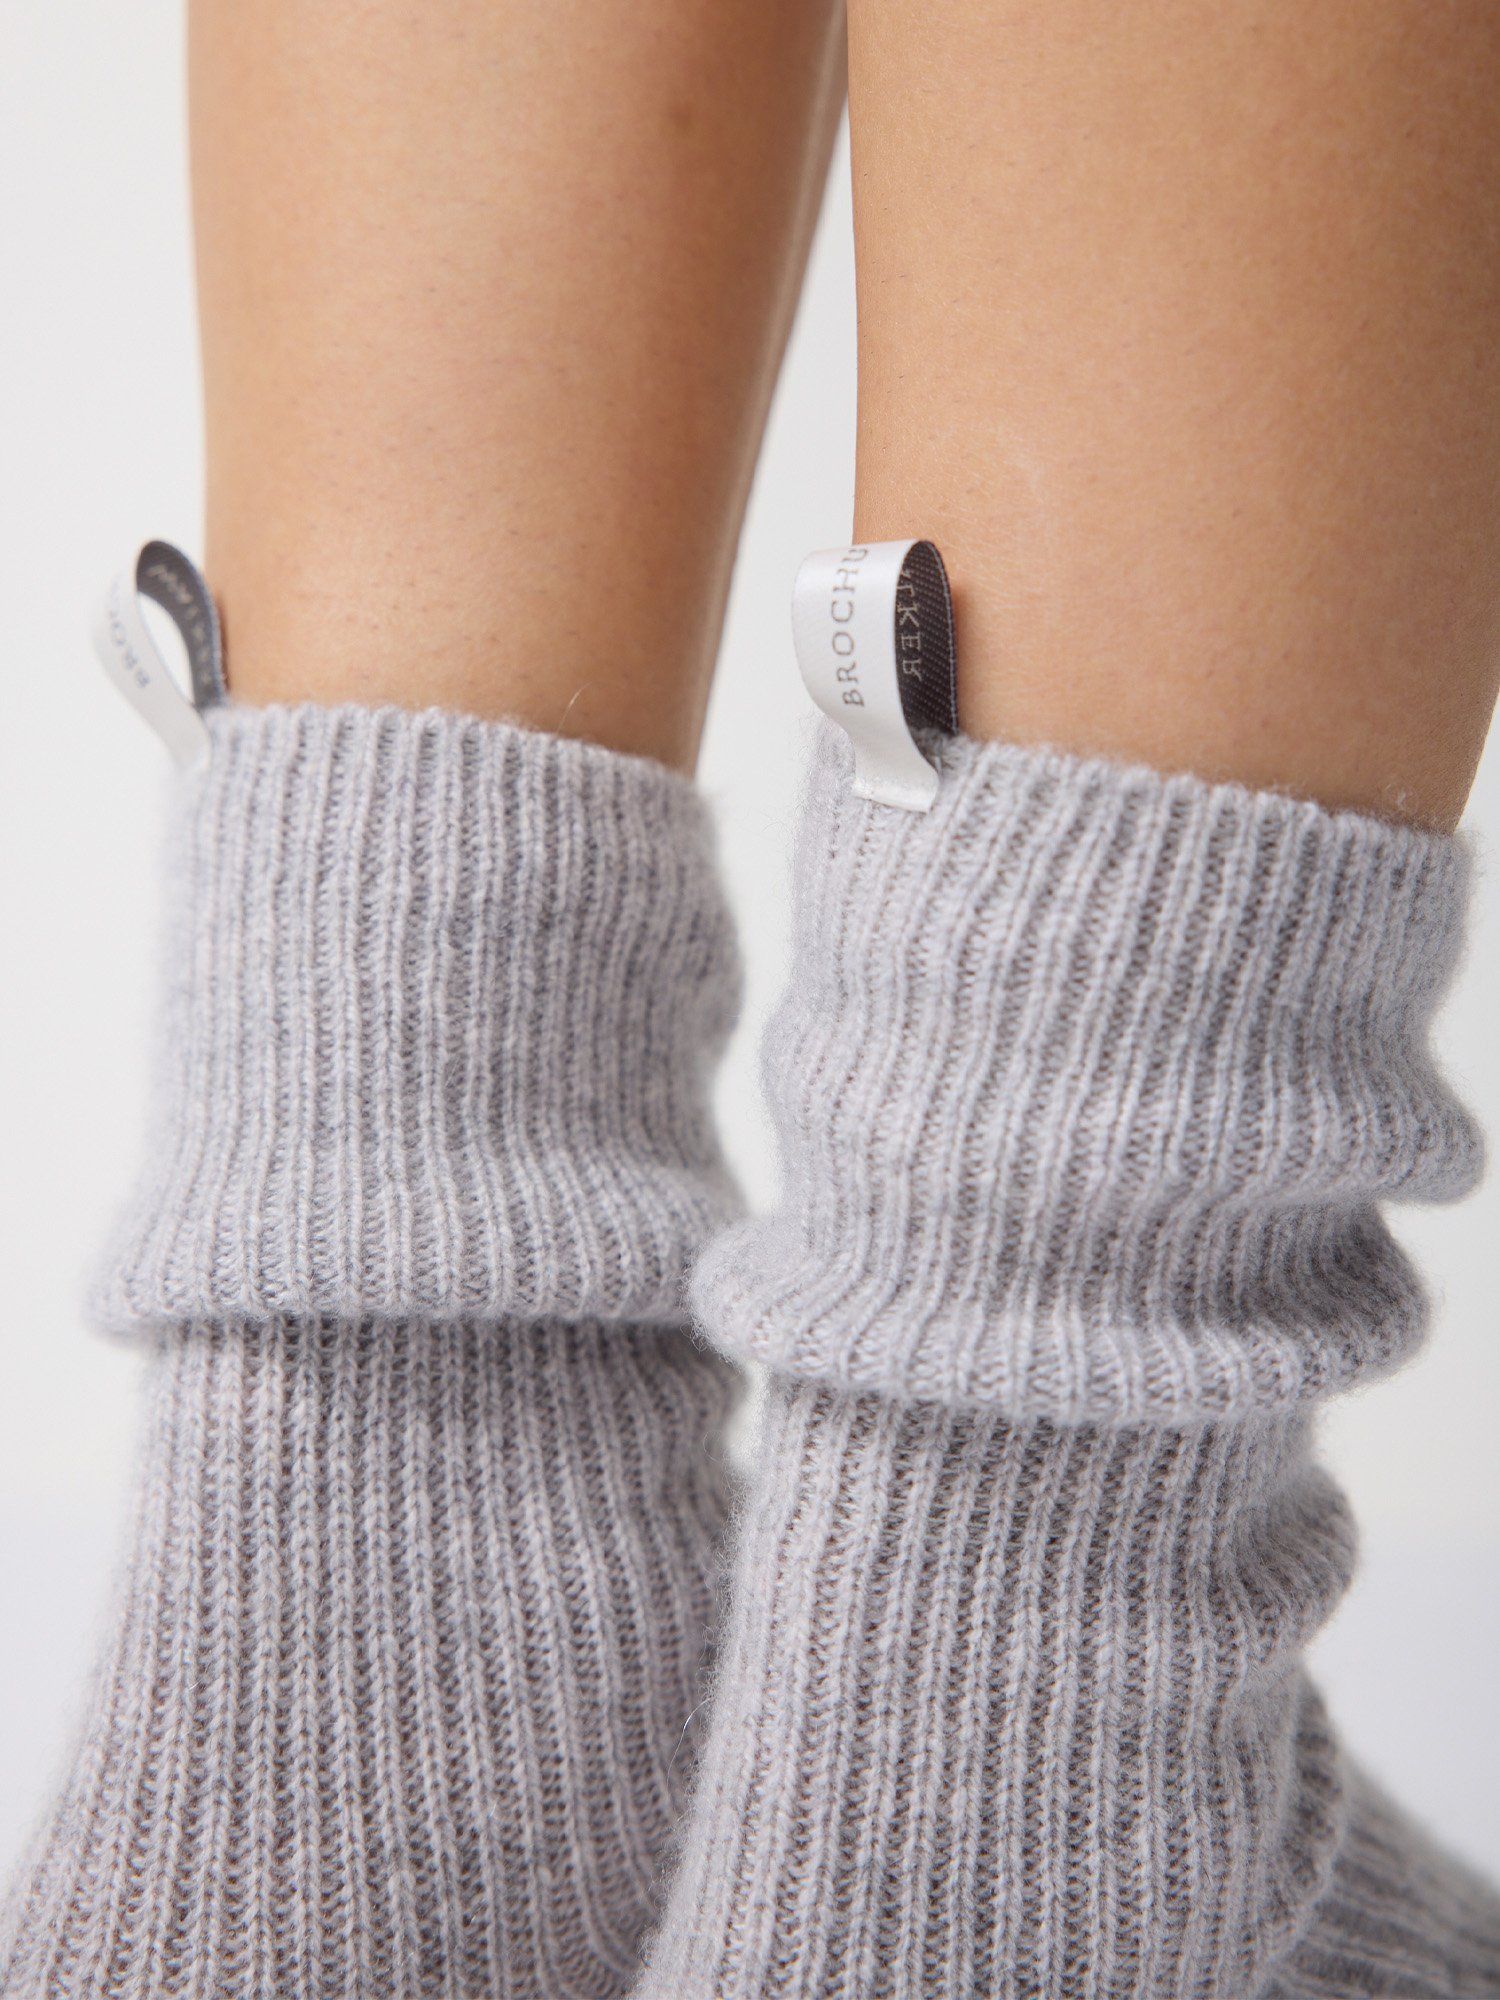 Do Cashmere socks really come to you
rescue in winter?